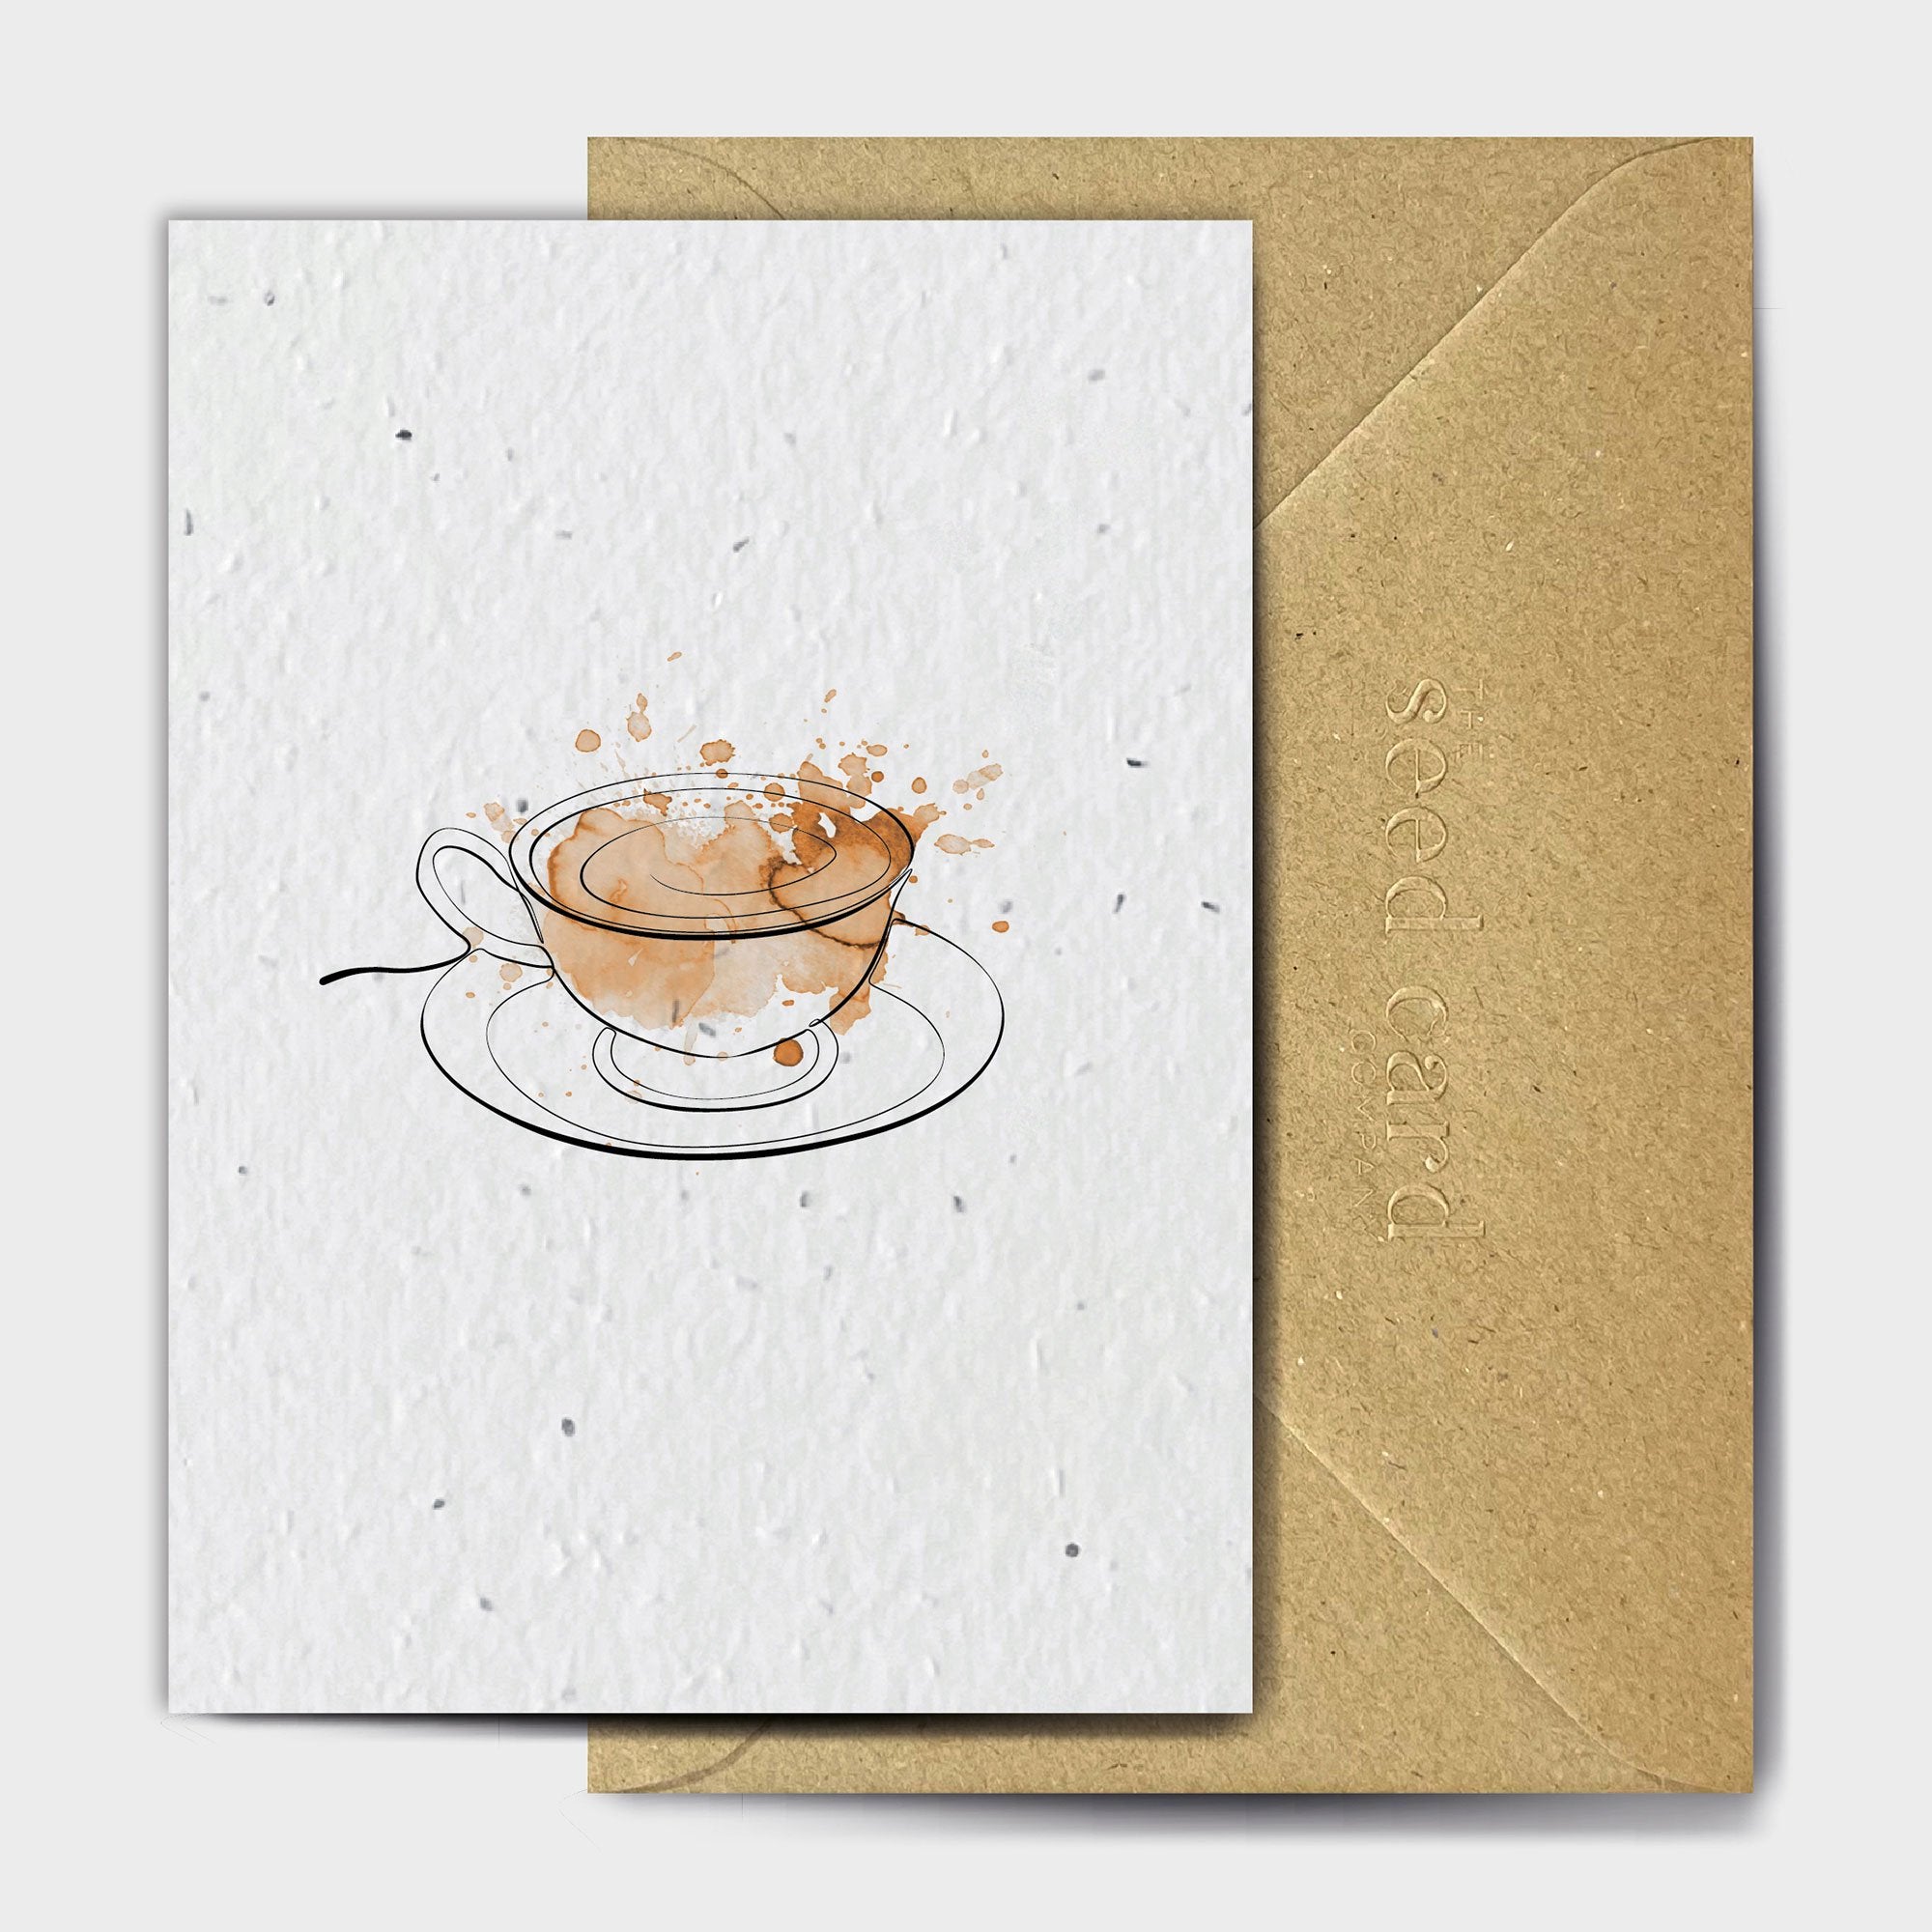 Shop online Frothy Coffee - 100% biodegradable seed-embedded cards Shop -The Seed Card Company